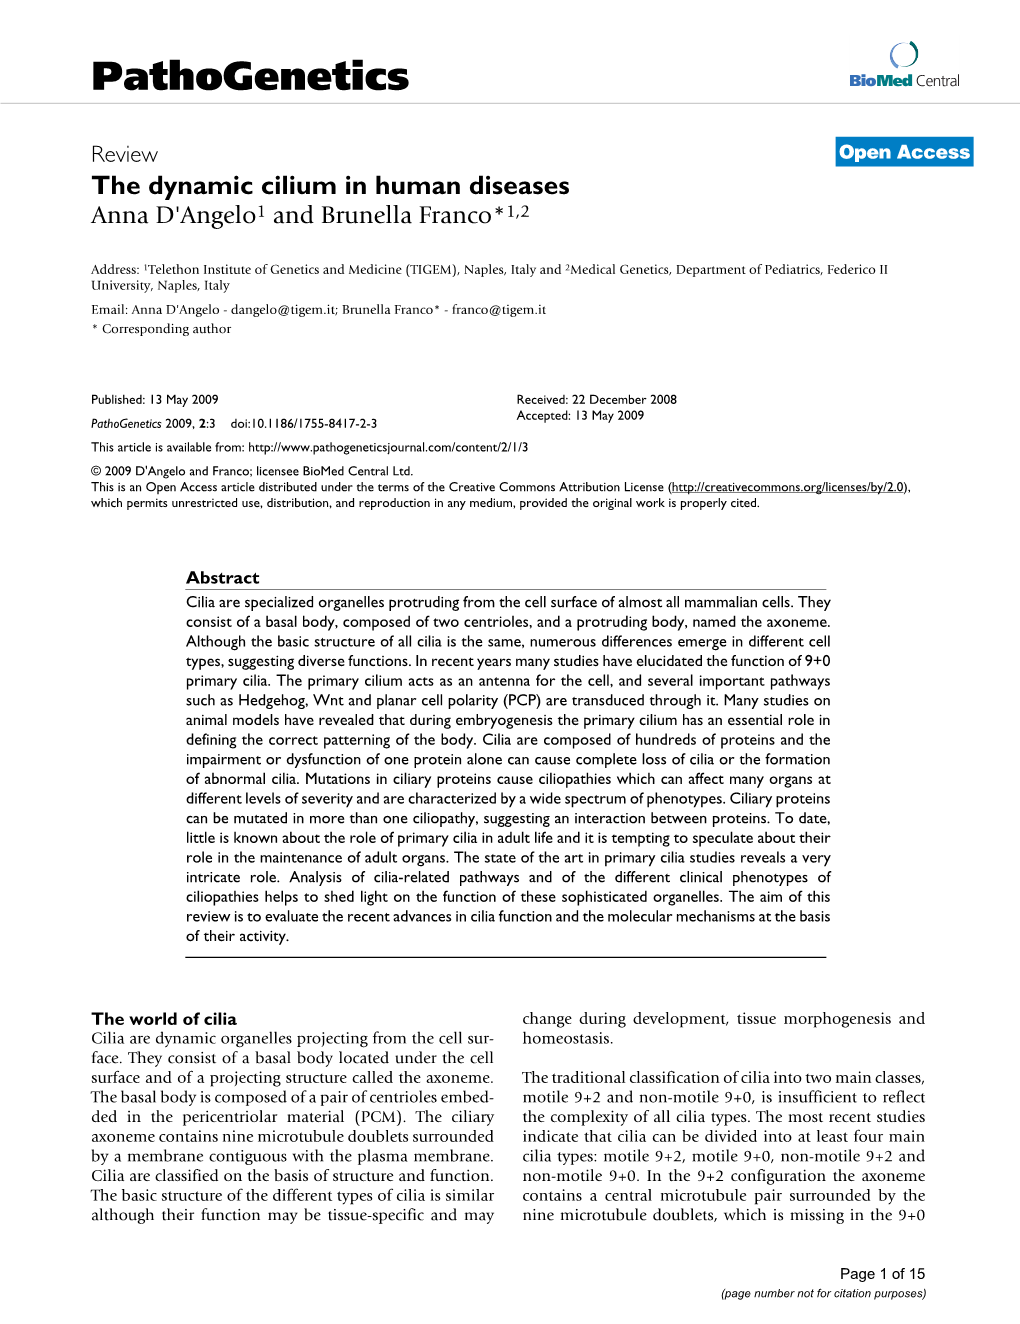 View Open Access the Dynamic Cilium in Human Diseases Anna D'angelo1 and Brunella Franco*1,2